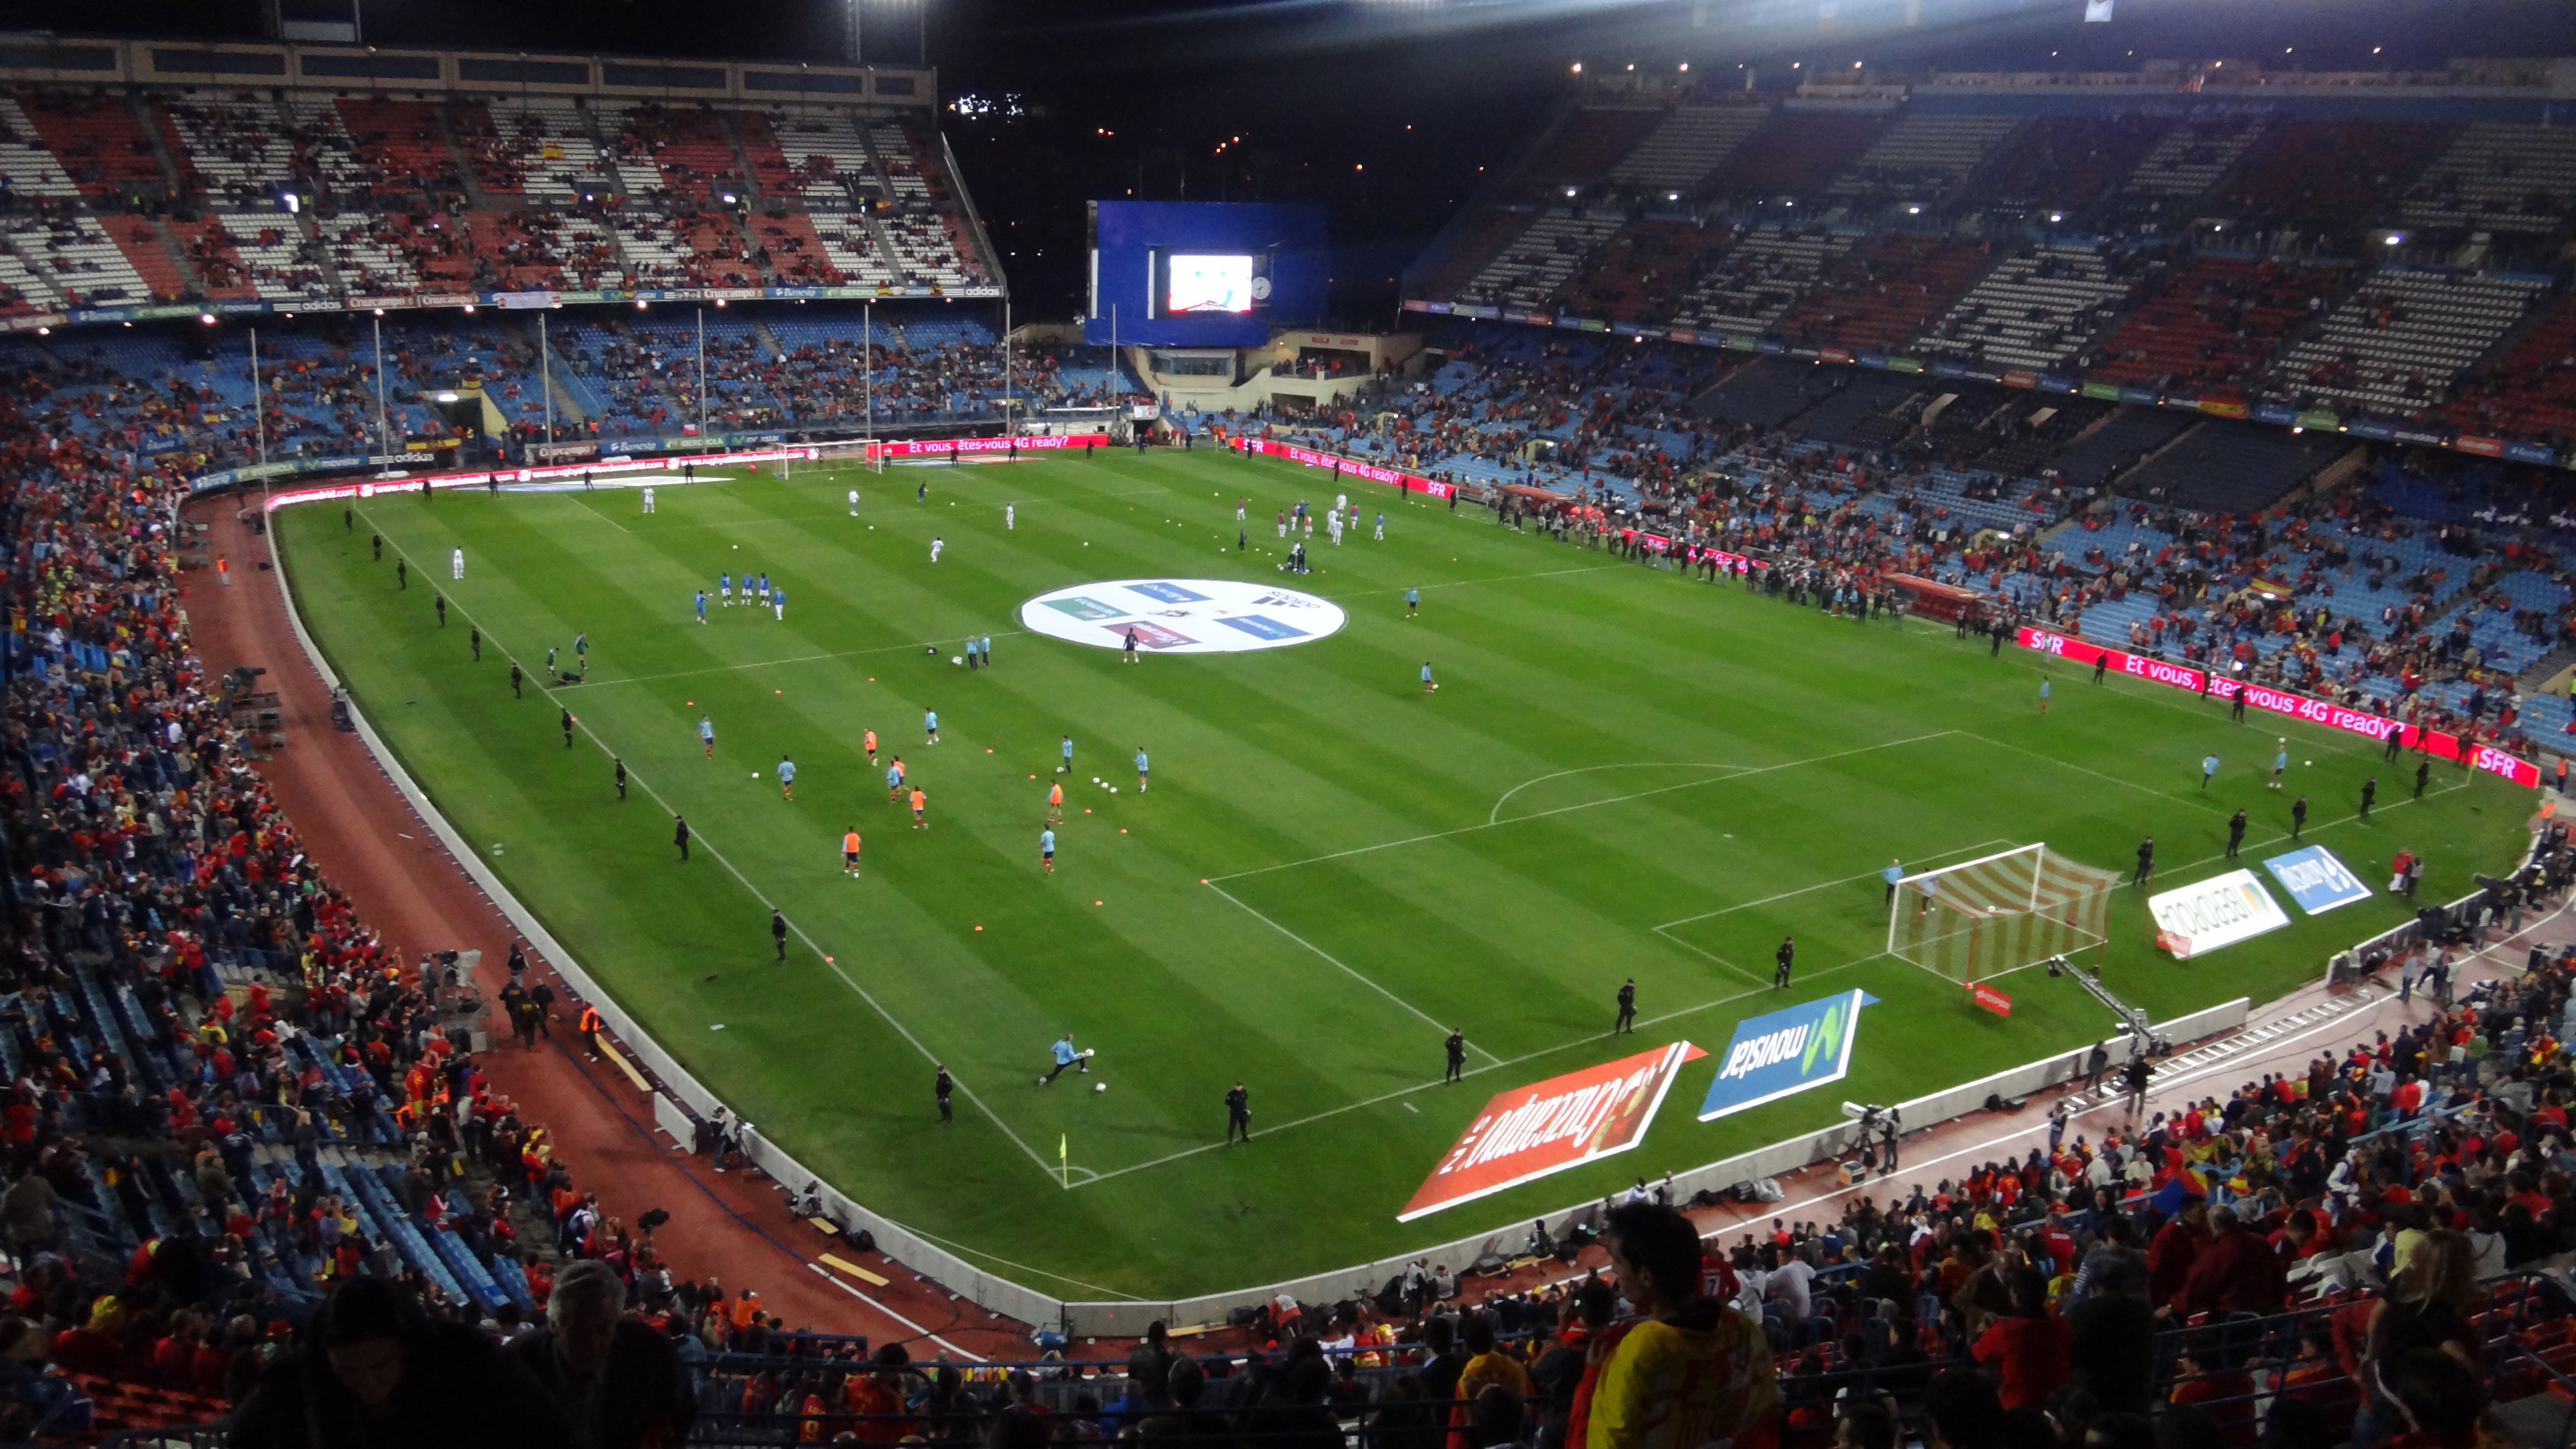 Vicente Calderon plays host to Atletico Bayern on Wednesday